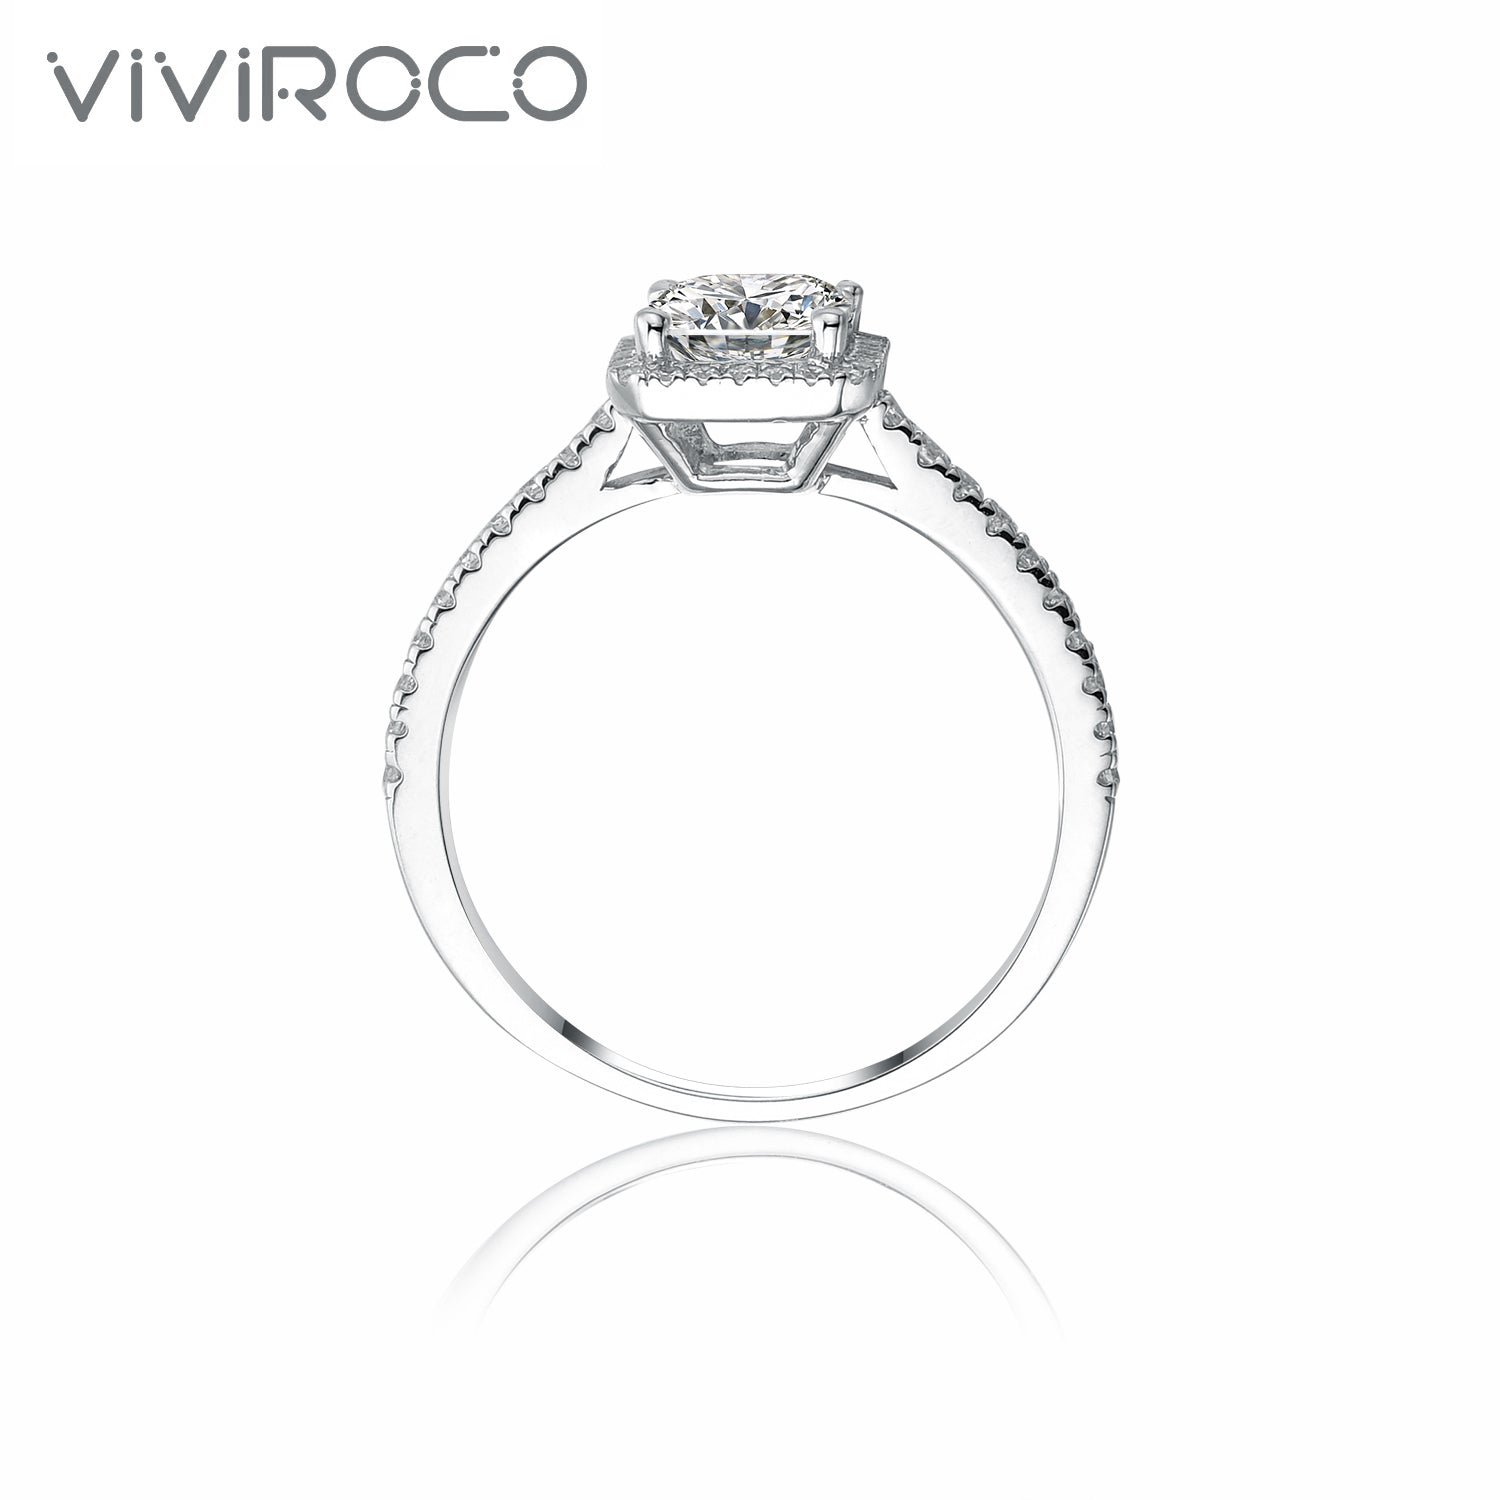 【02LIVE # link 23 - BUY 1 GET 1 free ring】RM1037 S925 Silver Moissanite Ring  2 Carat